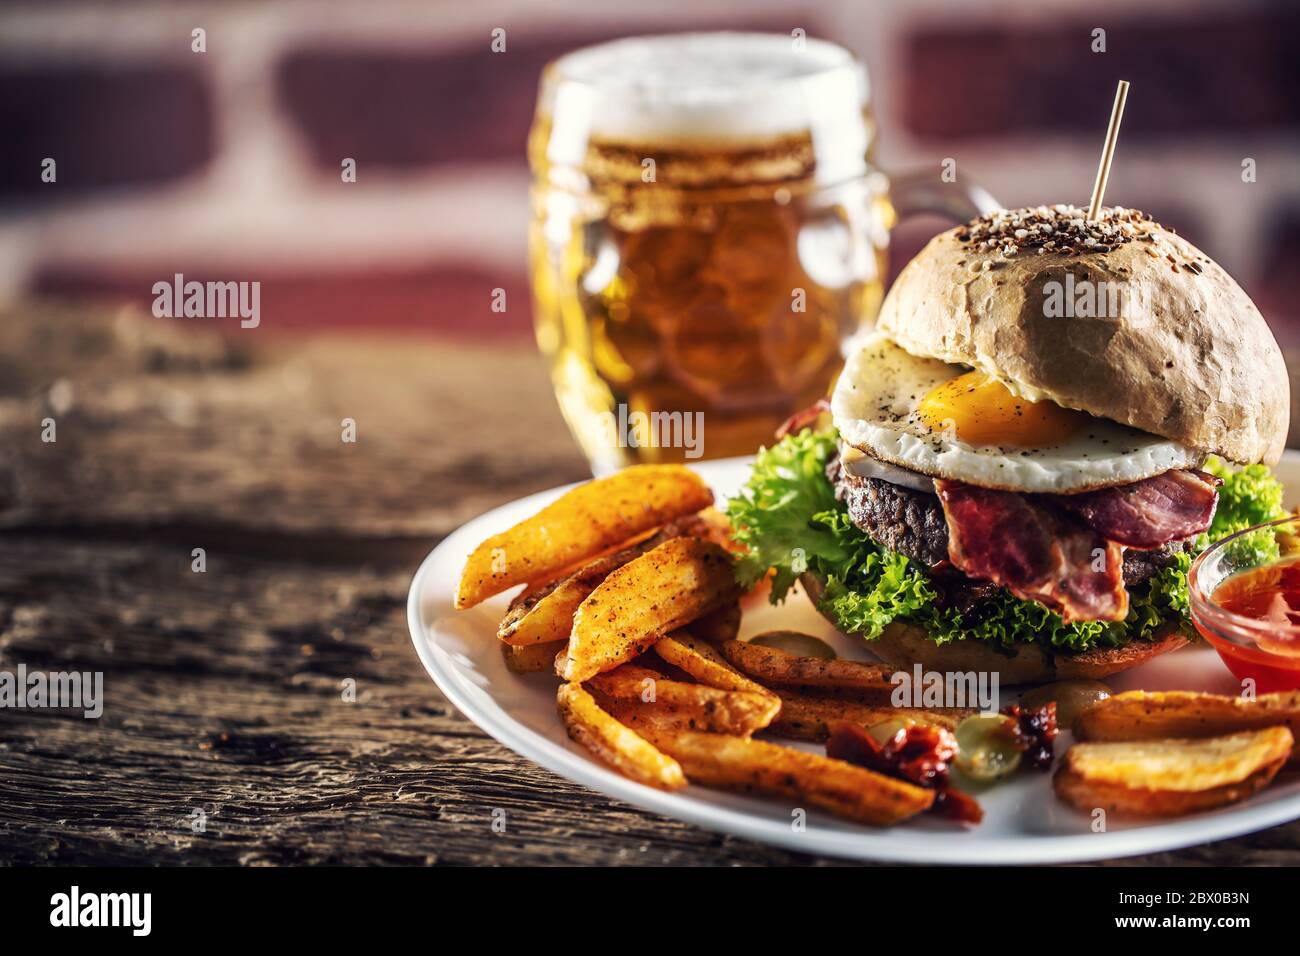 Burger with a sesame bun, fried egg and bacon, salad and potato wedges with a draft beer in the background Stock Photo